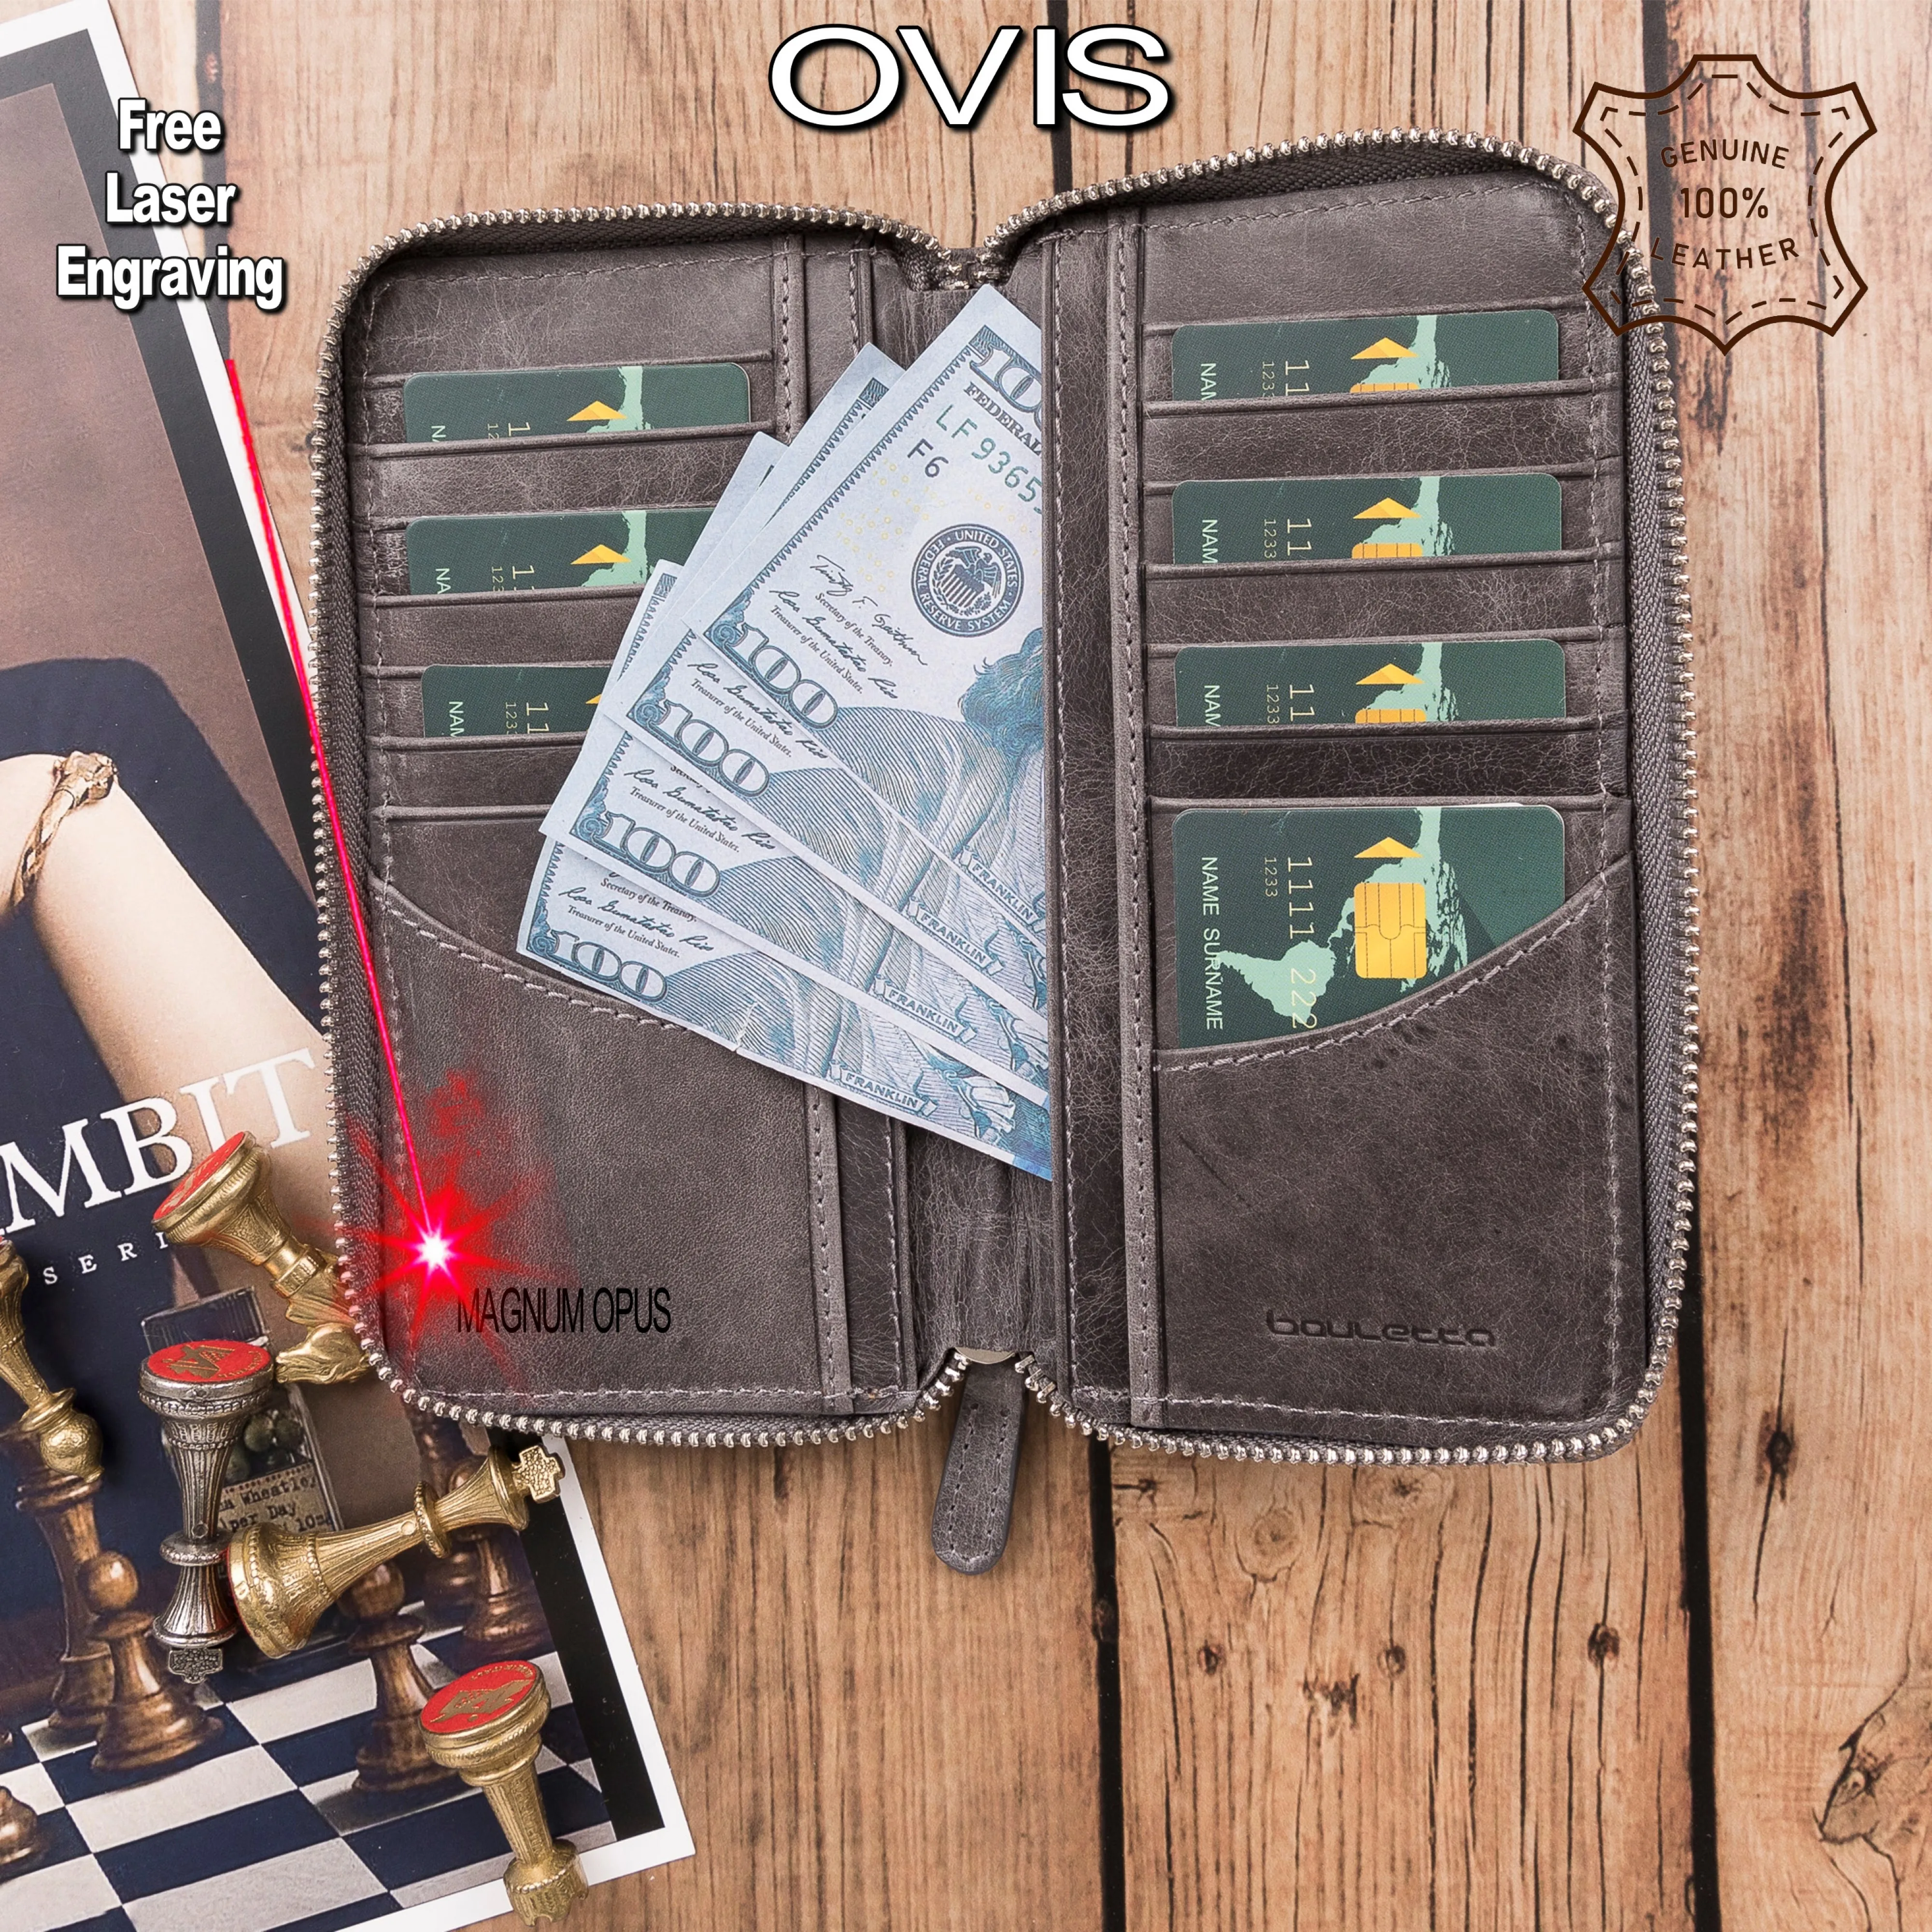 Handmade Genuine Leather Credit Card, Cash, ID Card and Phone Holder up to 6.8